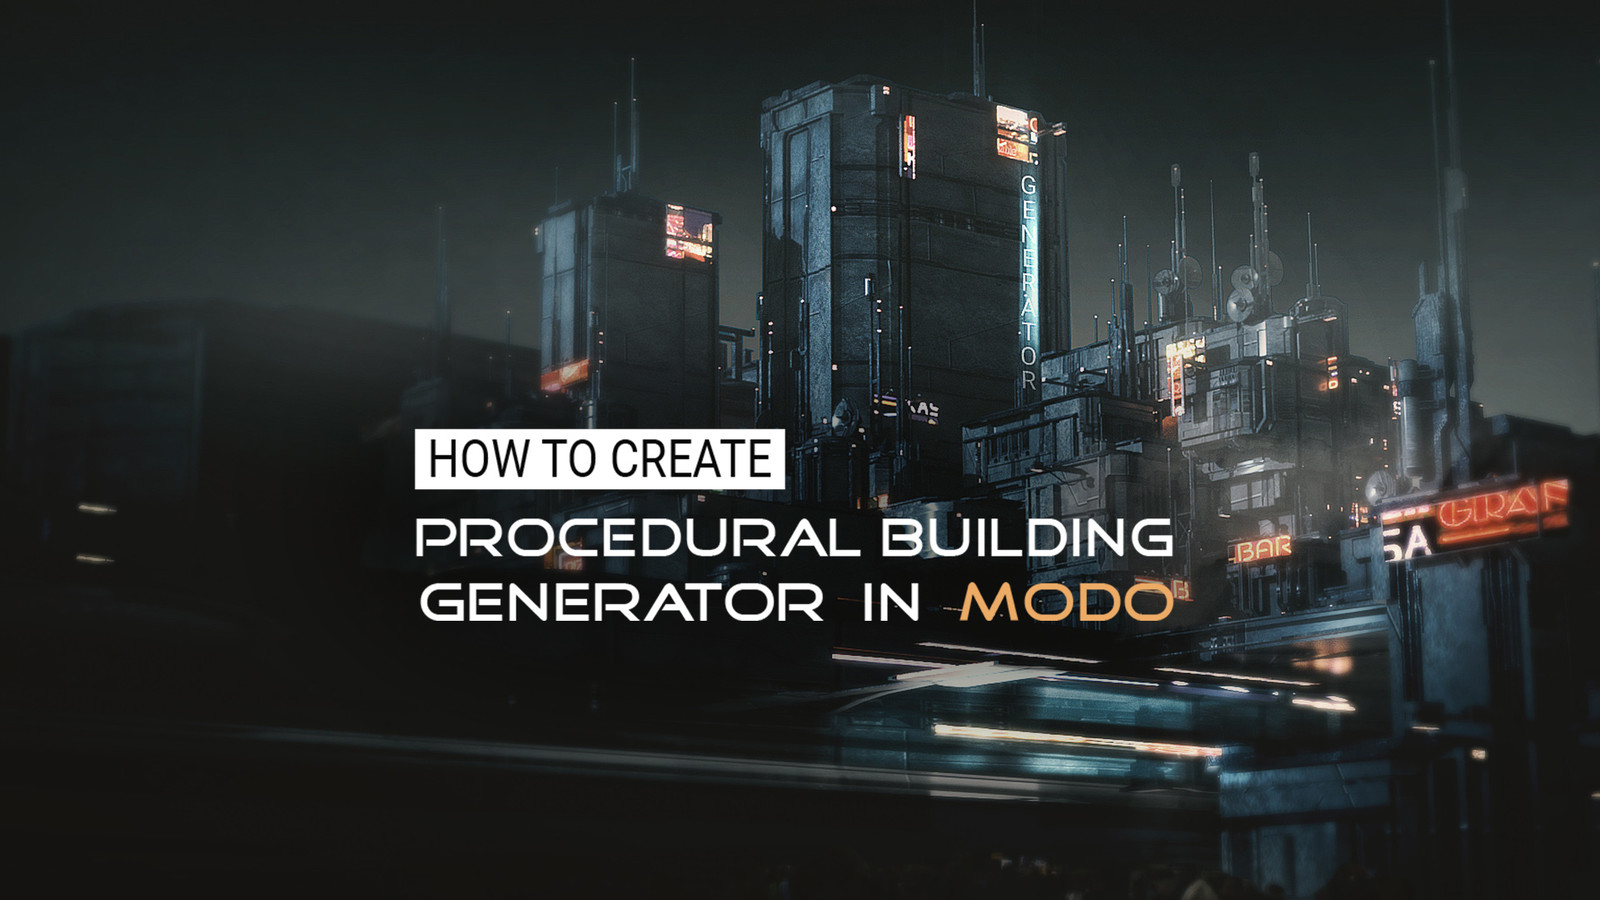 Gumroad - How to create Procedural Building Generator in Modo